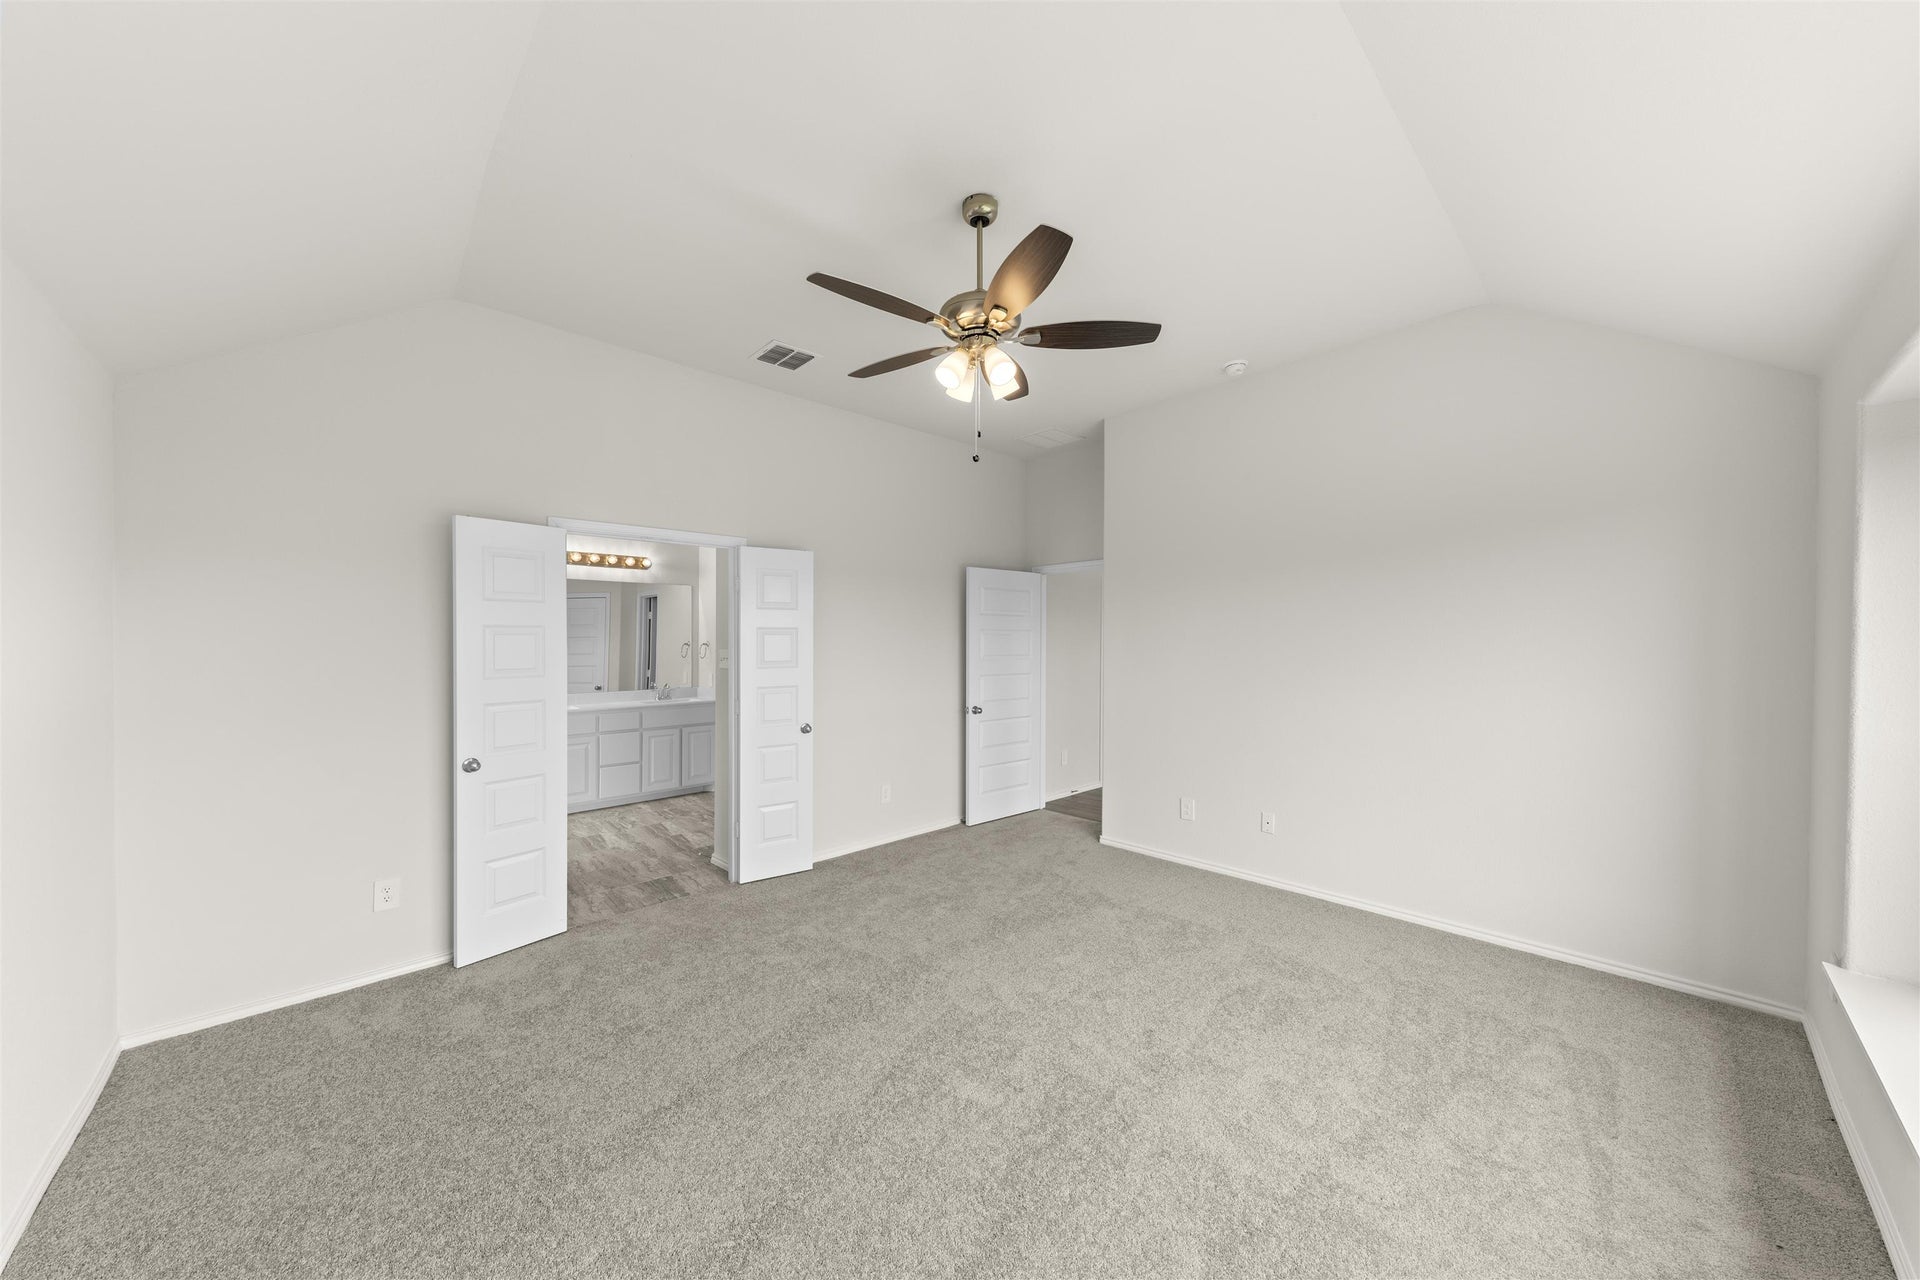 3br New Home in Heartland, TX